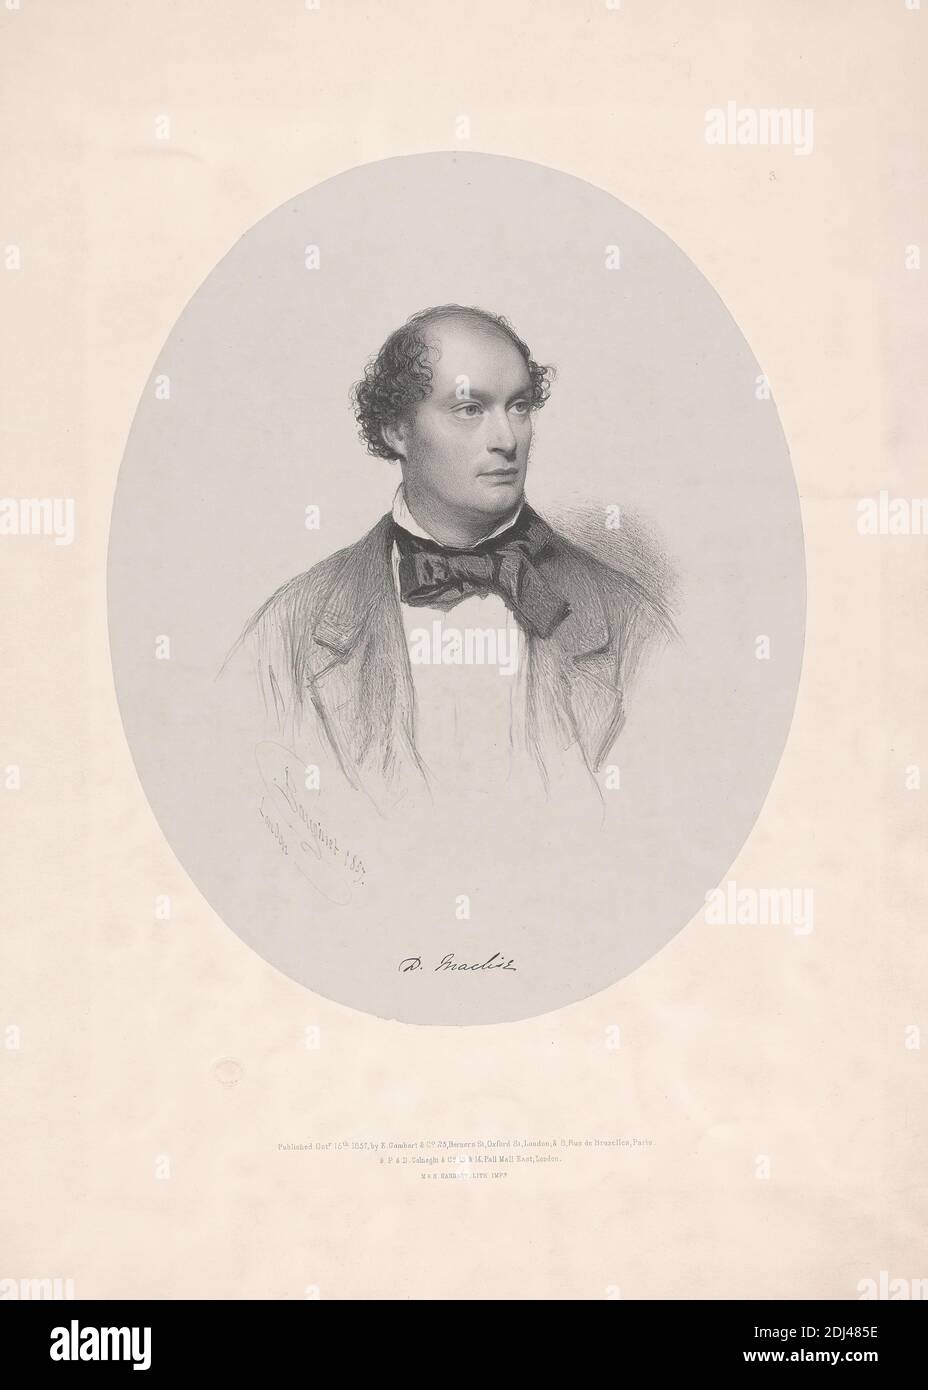 Daniel Maclise, Print made by Charles Baugniet, 1814–1886, Belgian, Printed by M & N Hanhart, active 1841–1852, Published by Ernest Gambart, 1814–1902, French, active in London (after 1840), Published by P. & D. Colnaghi, established 1760, active ca. 1785–1911, Italian, active in Britain, 1857, Lithograph on moderately thick, slightly textured, cream wove paper with gray chine collé, Sheet: 20 7/8 x 14 13/16 inches (53 x 37.6 cm) and Image: 13 3/4 x 11 inches (35 x 28 cm), artist, cravat, man, oval, painter, portrait Stock Photo